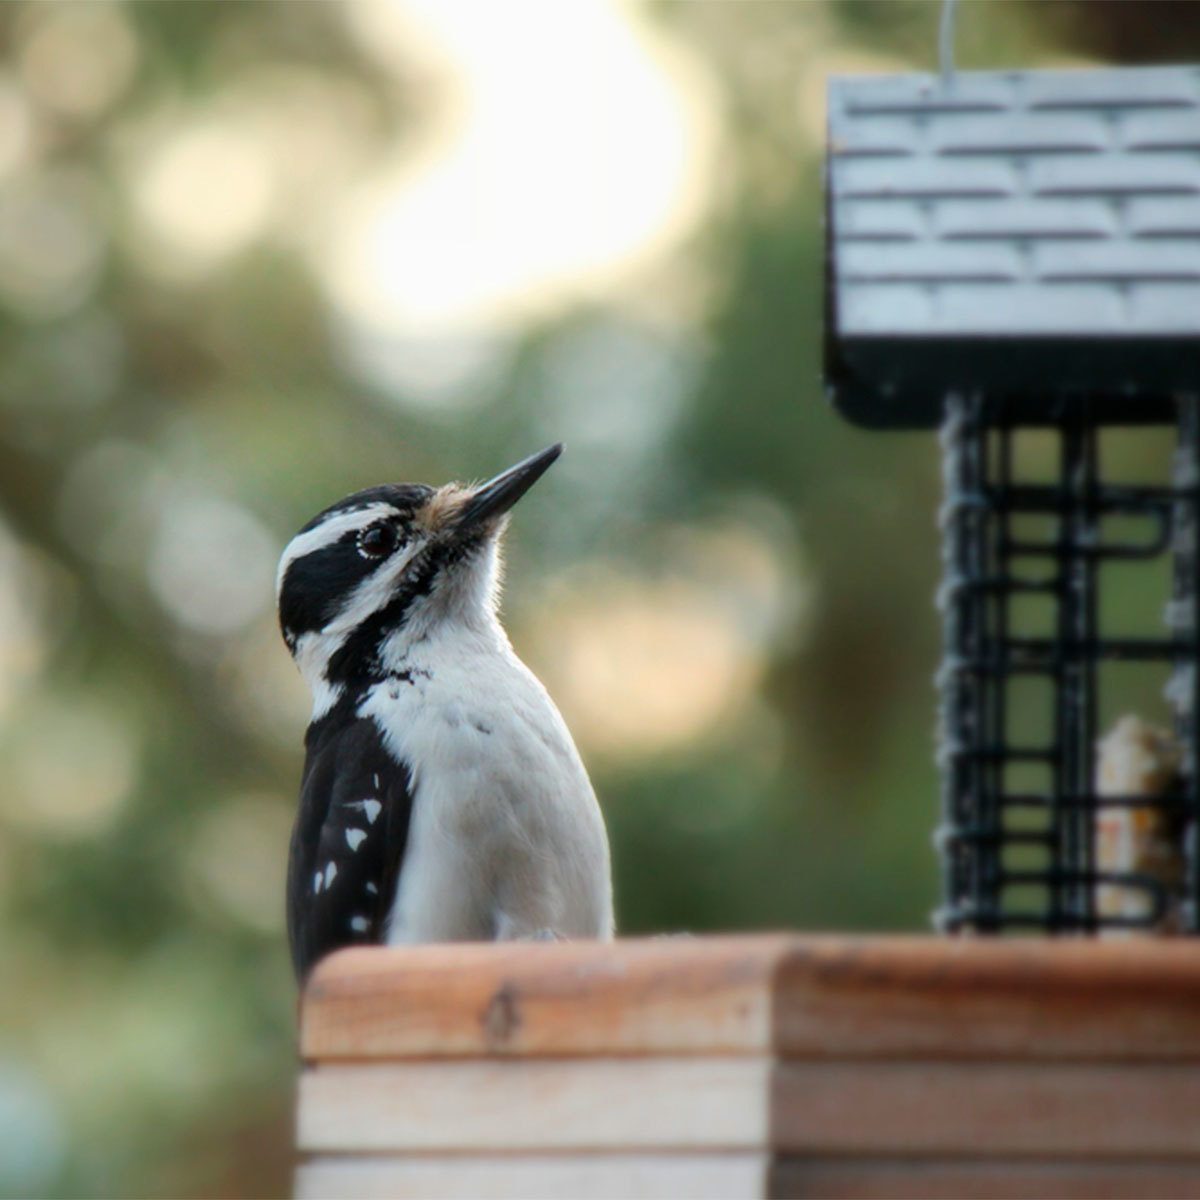 How to Get Rid of Woodpeckers: Woodpecker Deterrents